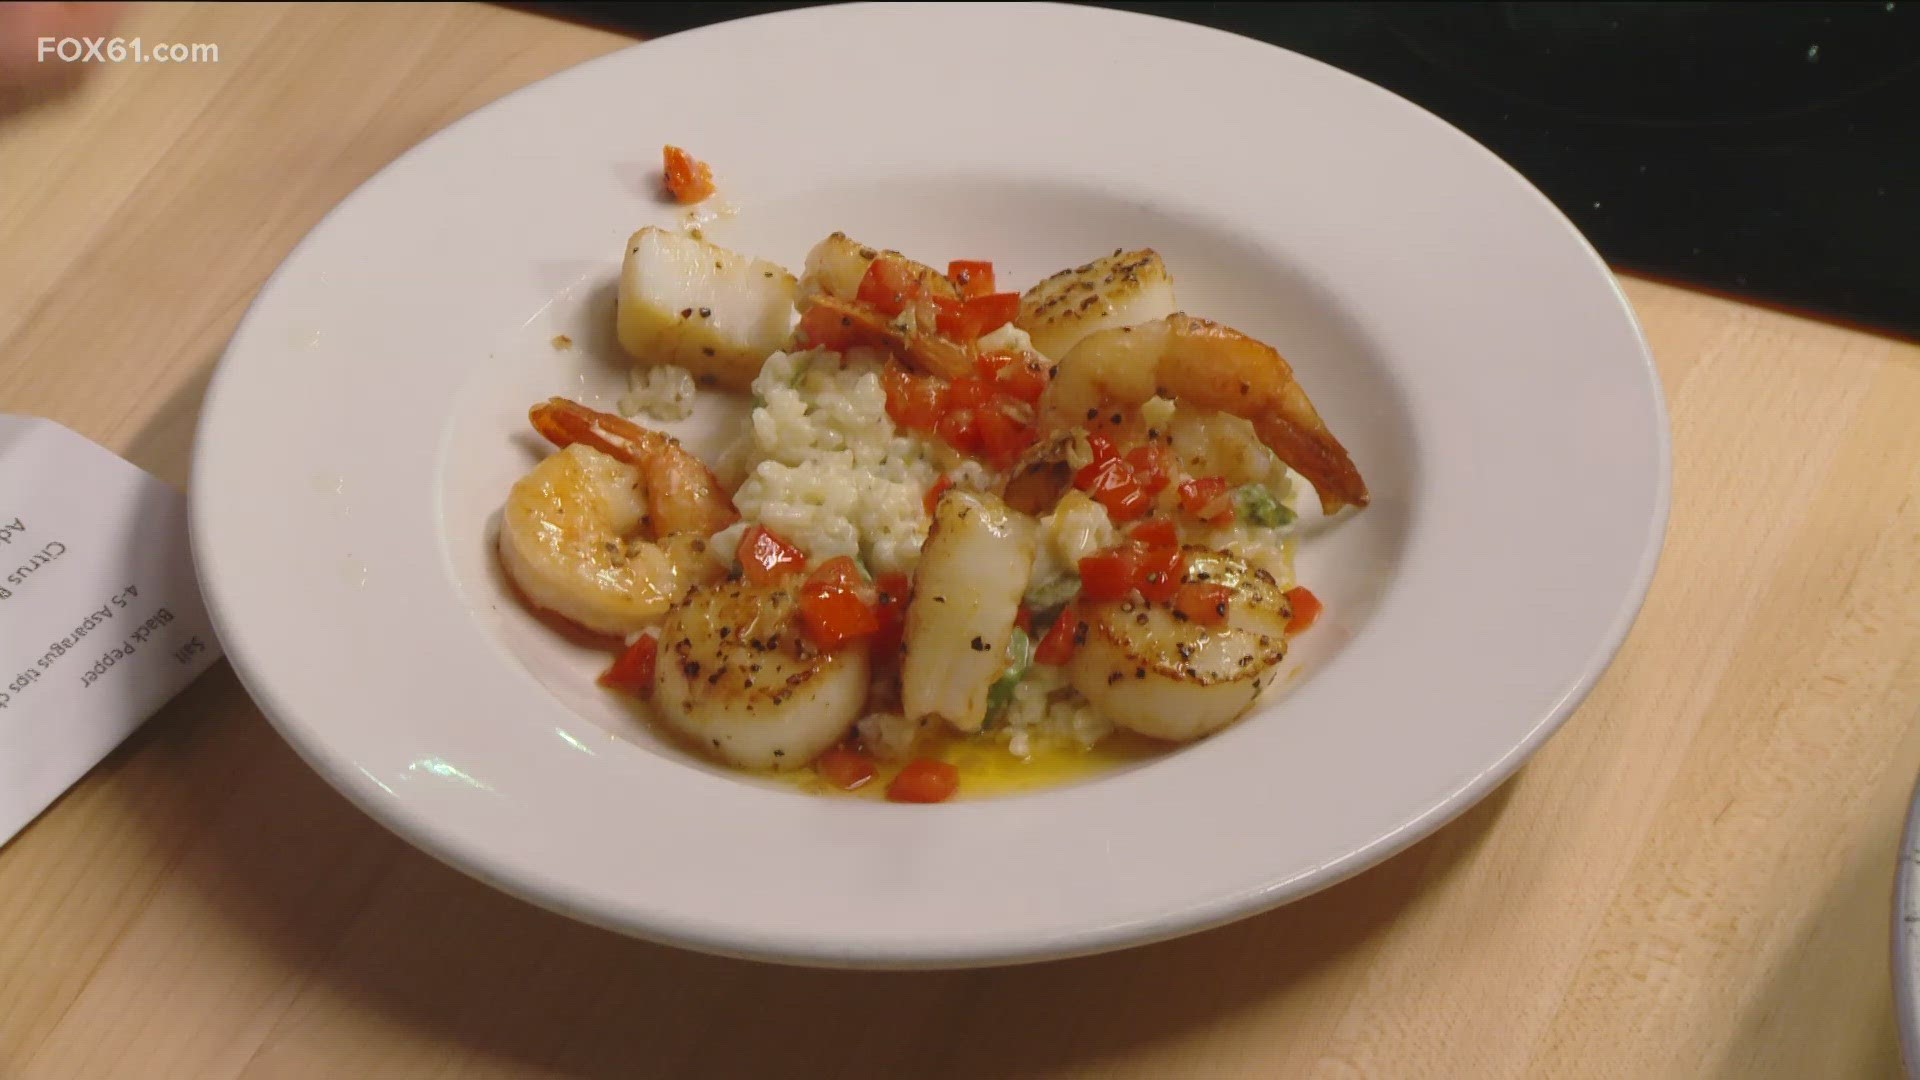 Learn how to make a summertime savory meal out of seared scallops and shrimp from Guilford Mooring.